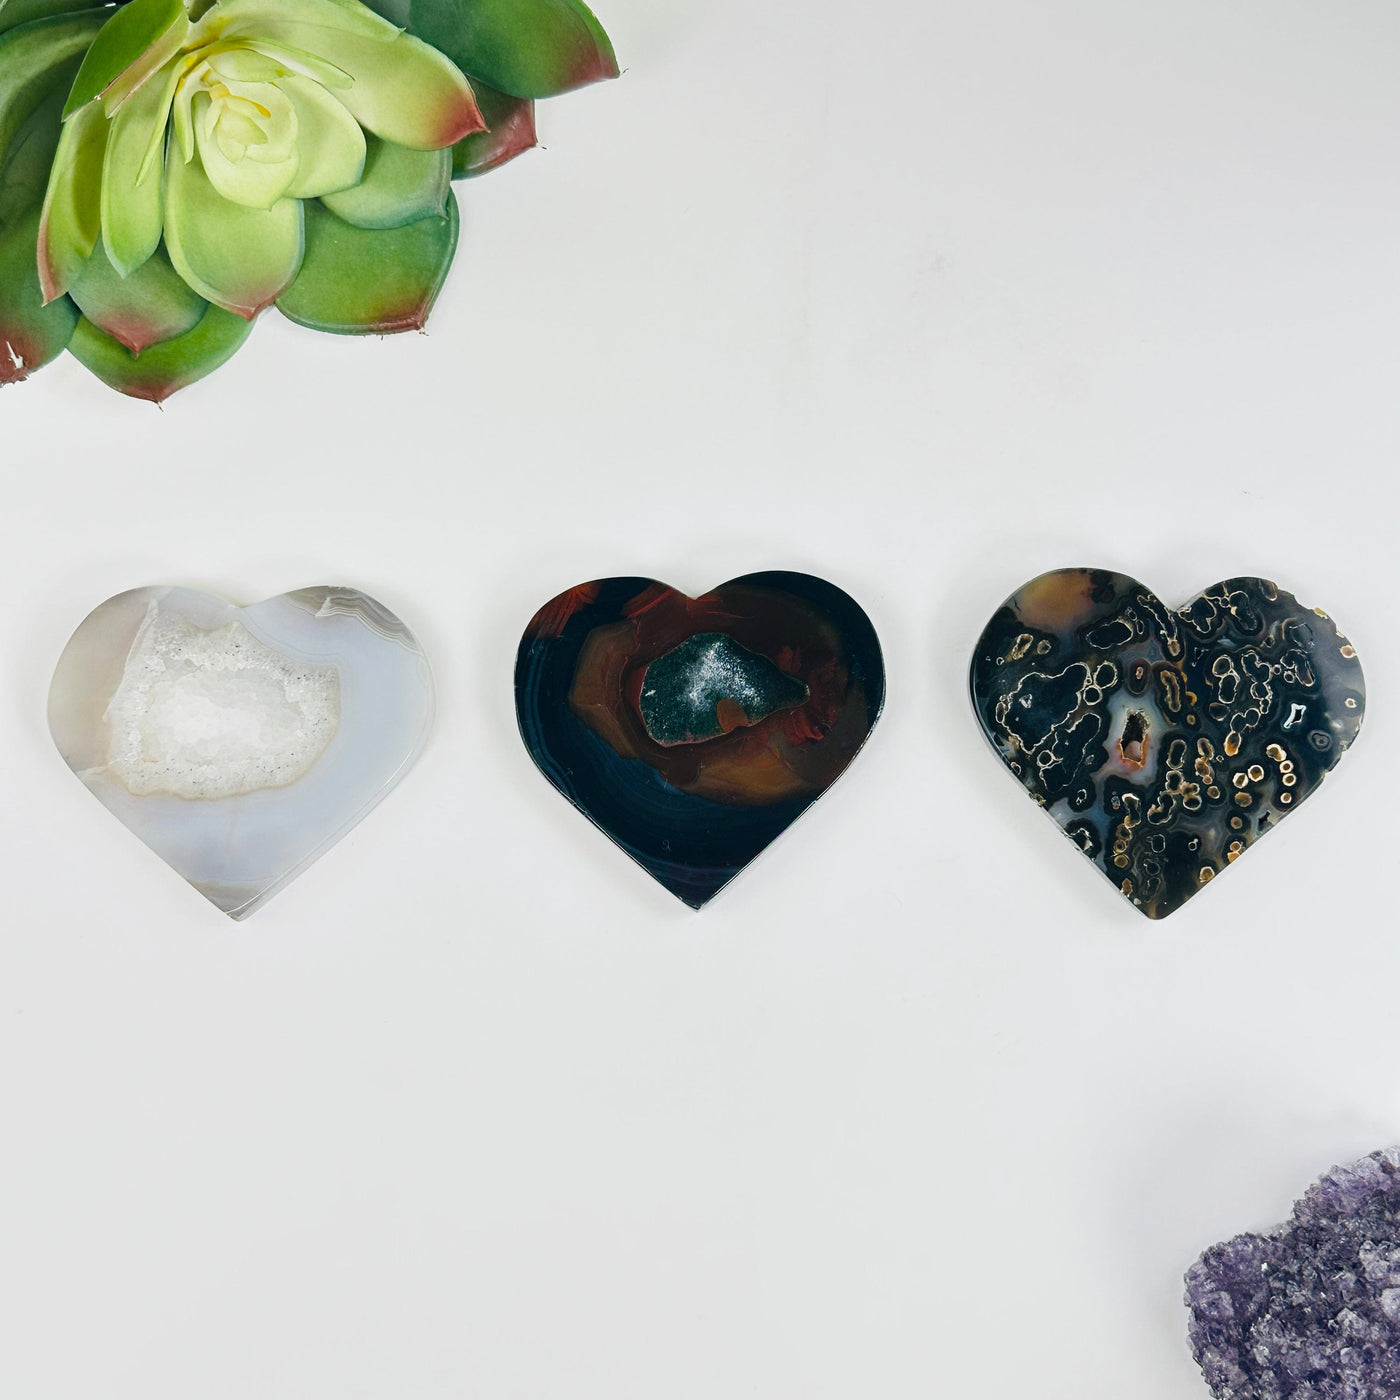 all variants of Natural Agate Heart Slices with decorations on white background